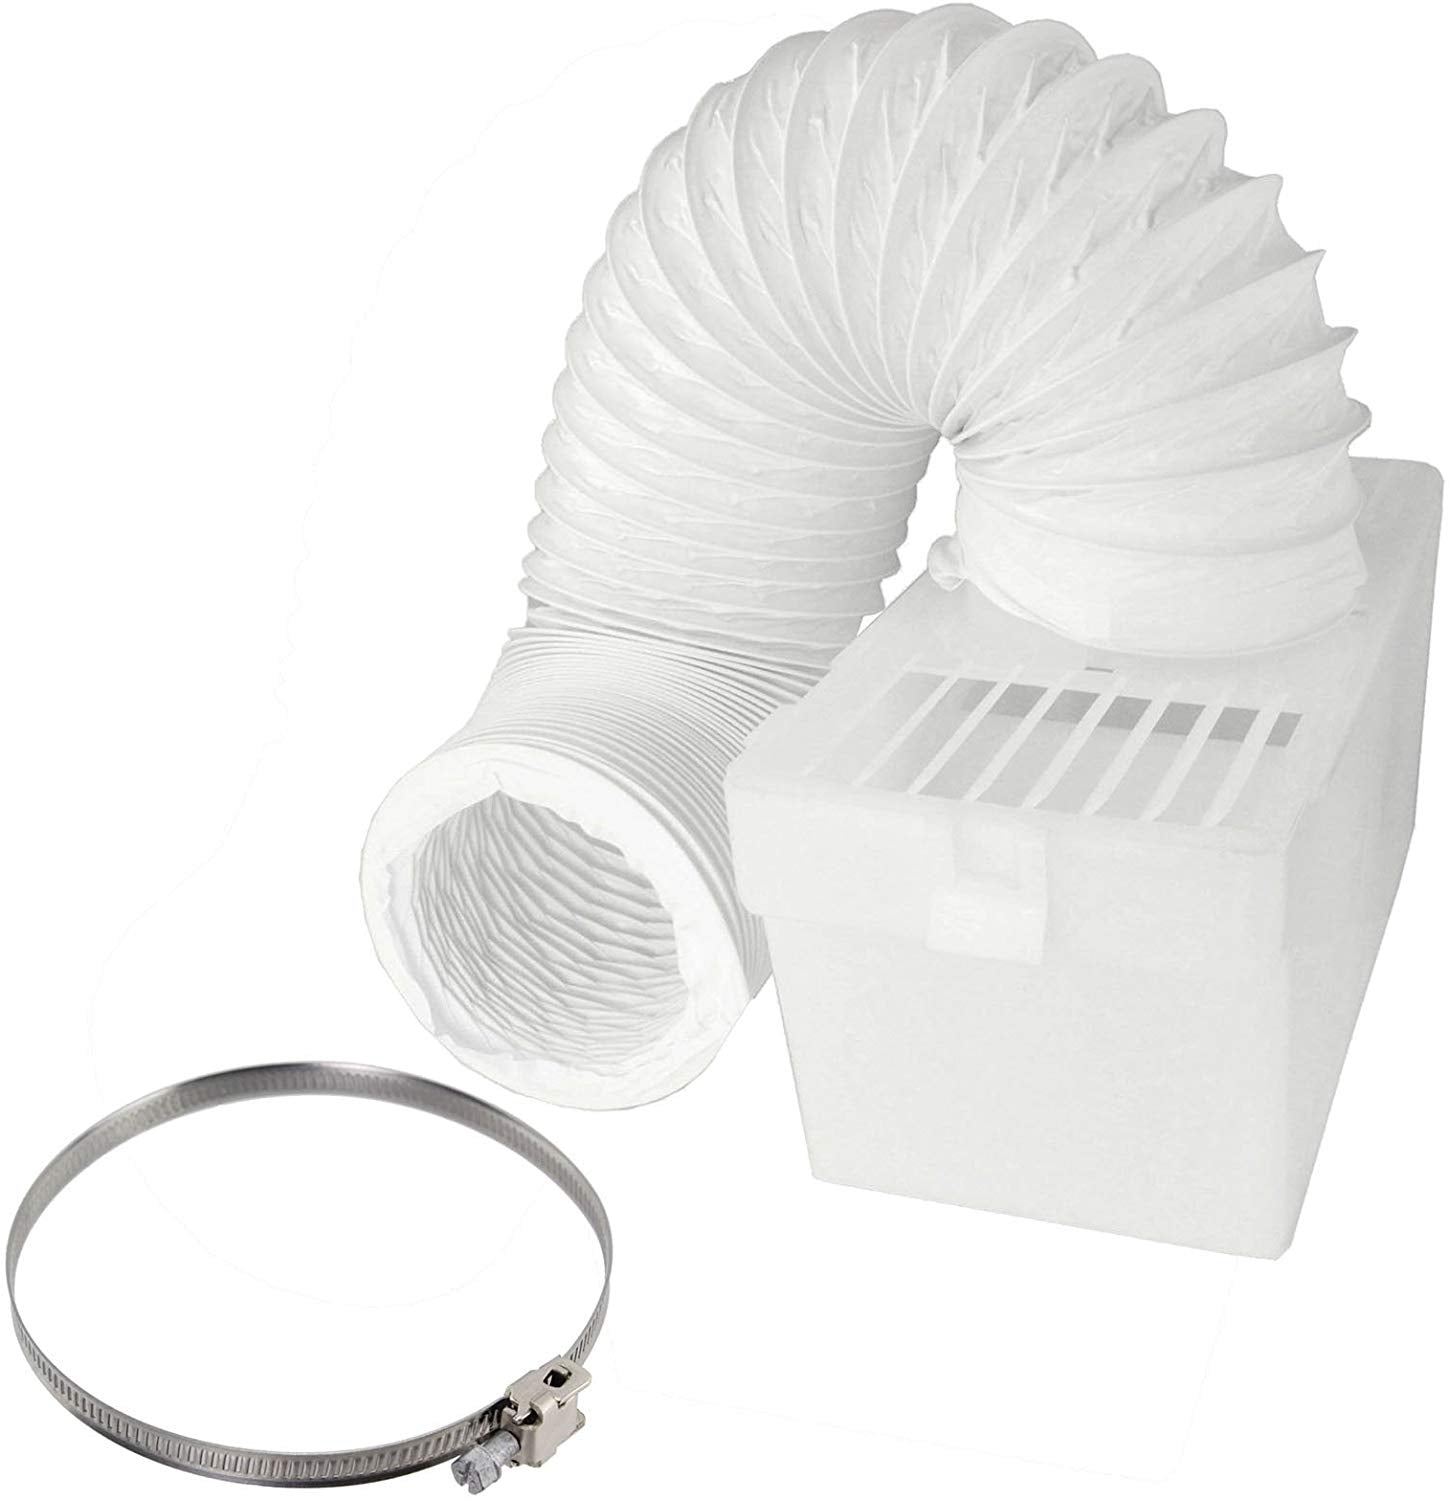 Condenser Vent Box & Hose Kit With Screw Clip for Beko Vented Tumble Dryer (4" / 100mm Diameter)